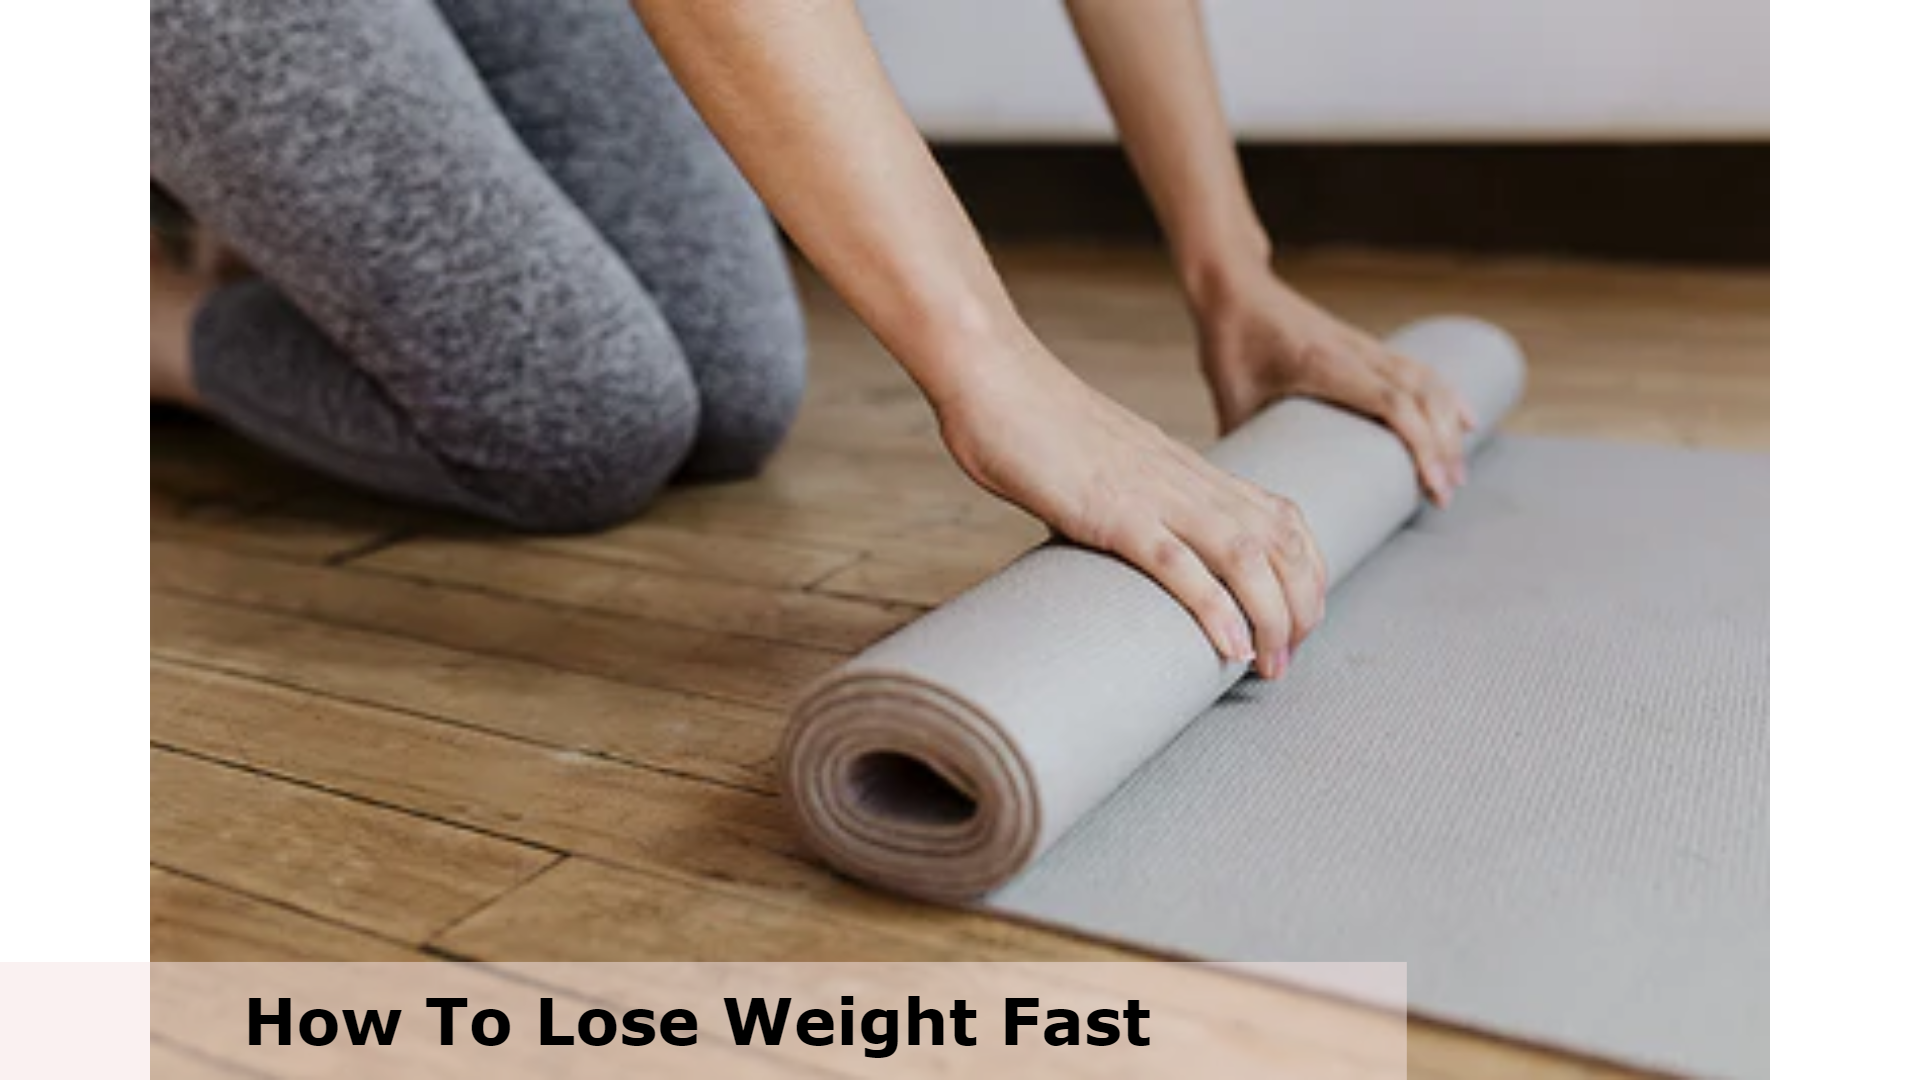 how to lose weight fast in Singapore, How to Lose Weight Fast in 5 Simple Steps, How can I lose weight in 7 days at home in Singapore?, how to lose weight fast in 2 weeks 10 kg, how to lose weight fast without exercise, how to lose weight fast naturally and permanently, how to lose belly fat, how to lose weight in 7 days, how to lose weight fast with exercise, how to lose belly fat fast, how to lose weight overnight fast, How can I lose 10 kgs in 2 weeks in Singapore?, What are the 9 rules of losing weight in Singapore?, How do you lose 5 pounds in a week in Singapore?, Ways to Lose Weight Without Dieting,